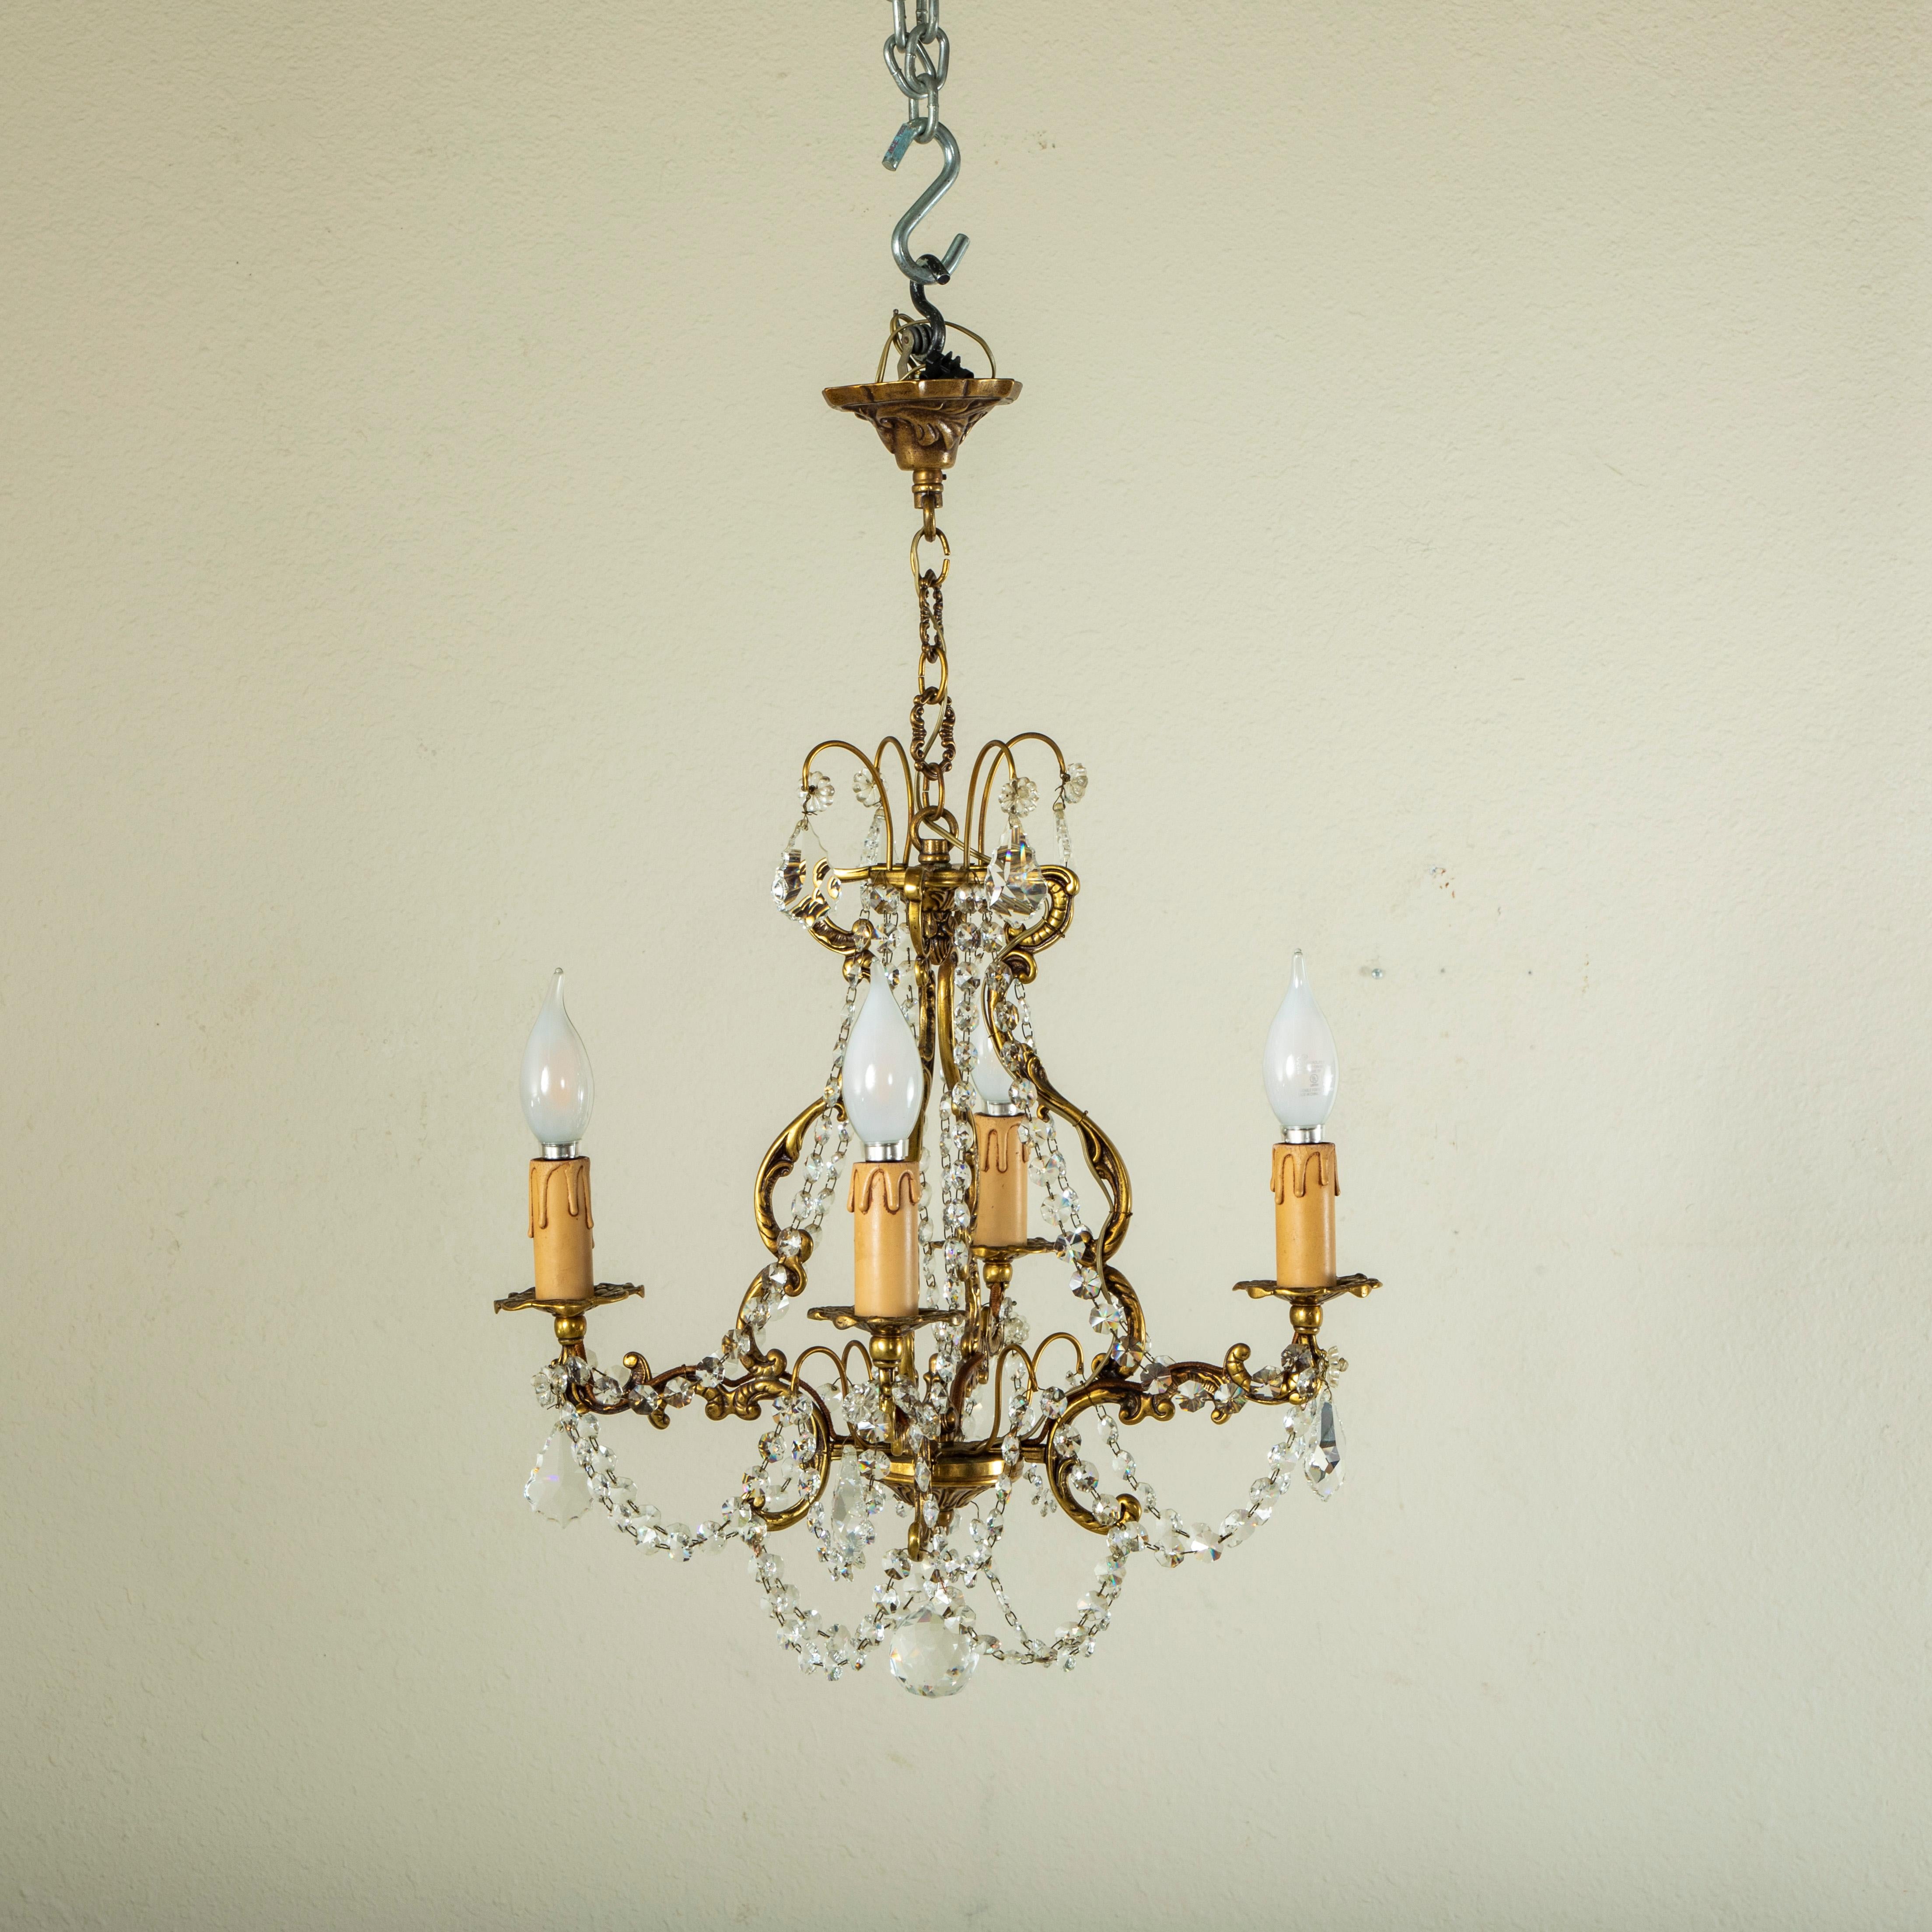 Early 20th Century Small Scale French Bronze and Strass Crystal Chandelier For Sale 1